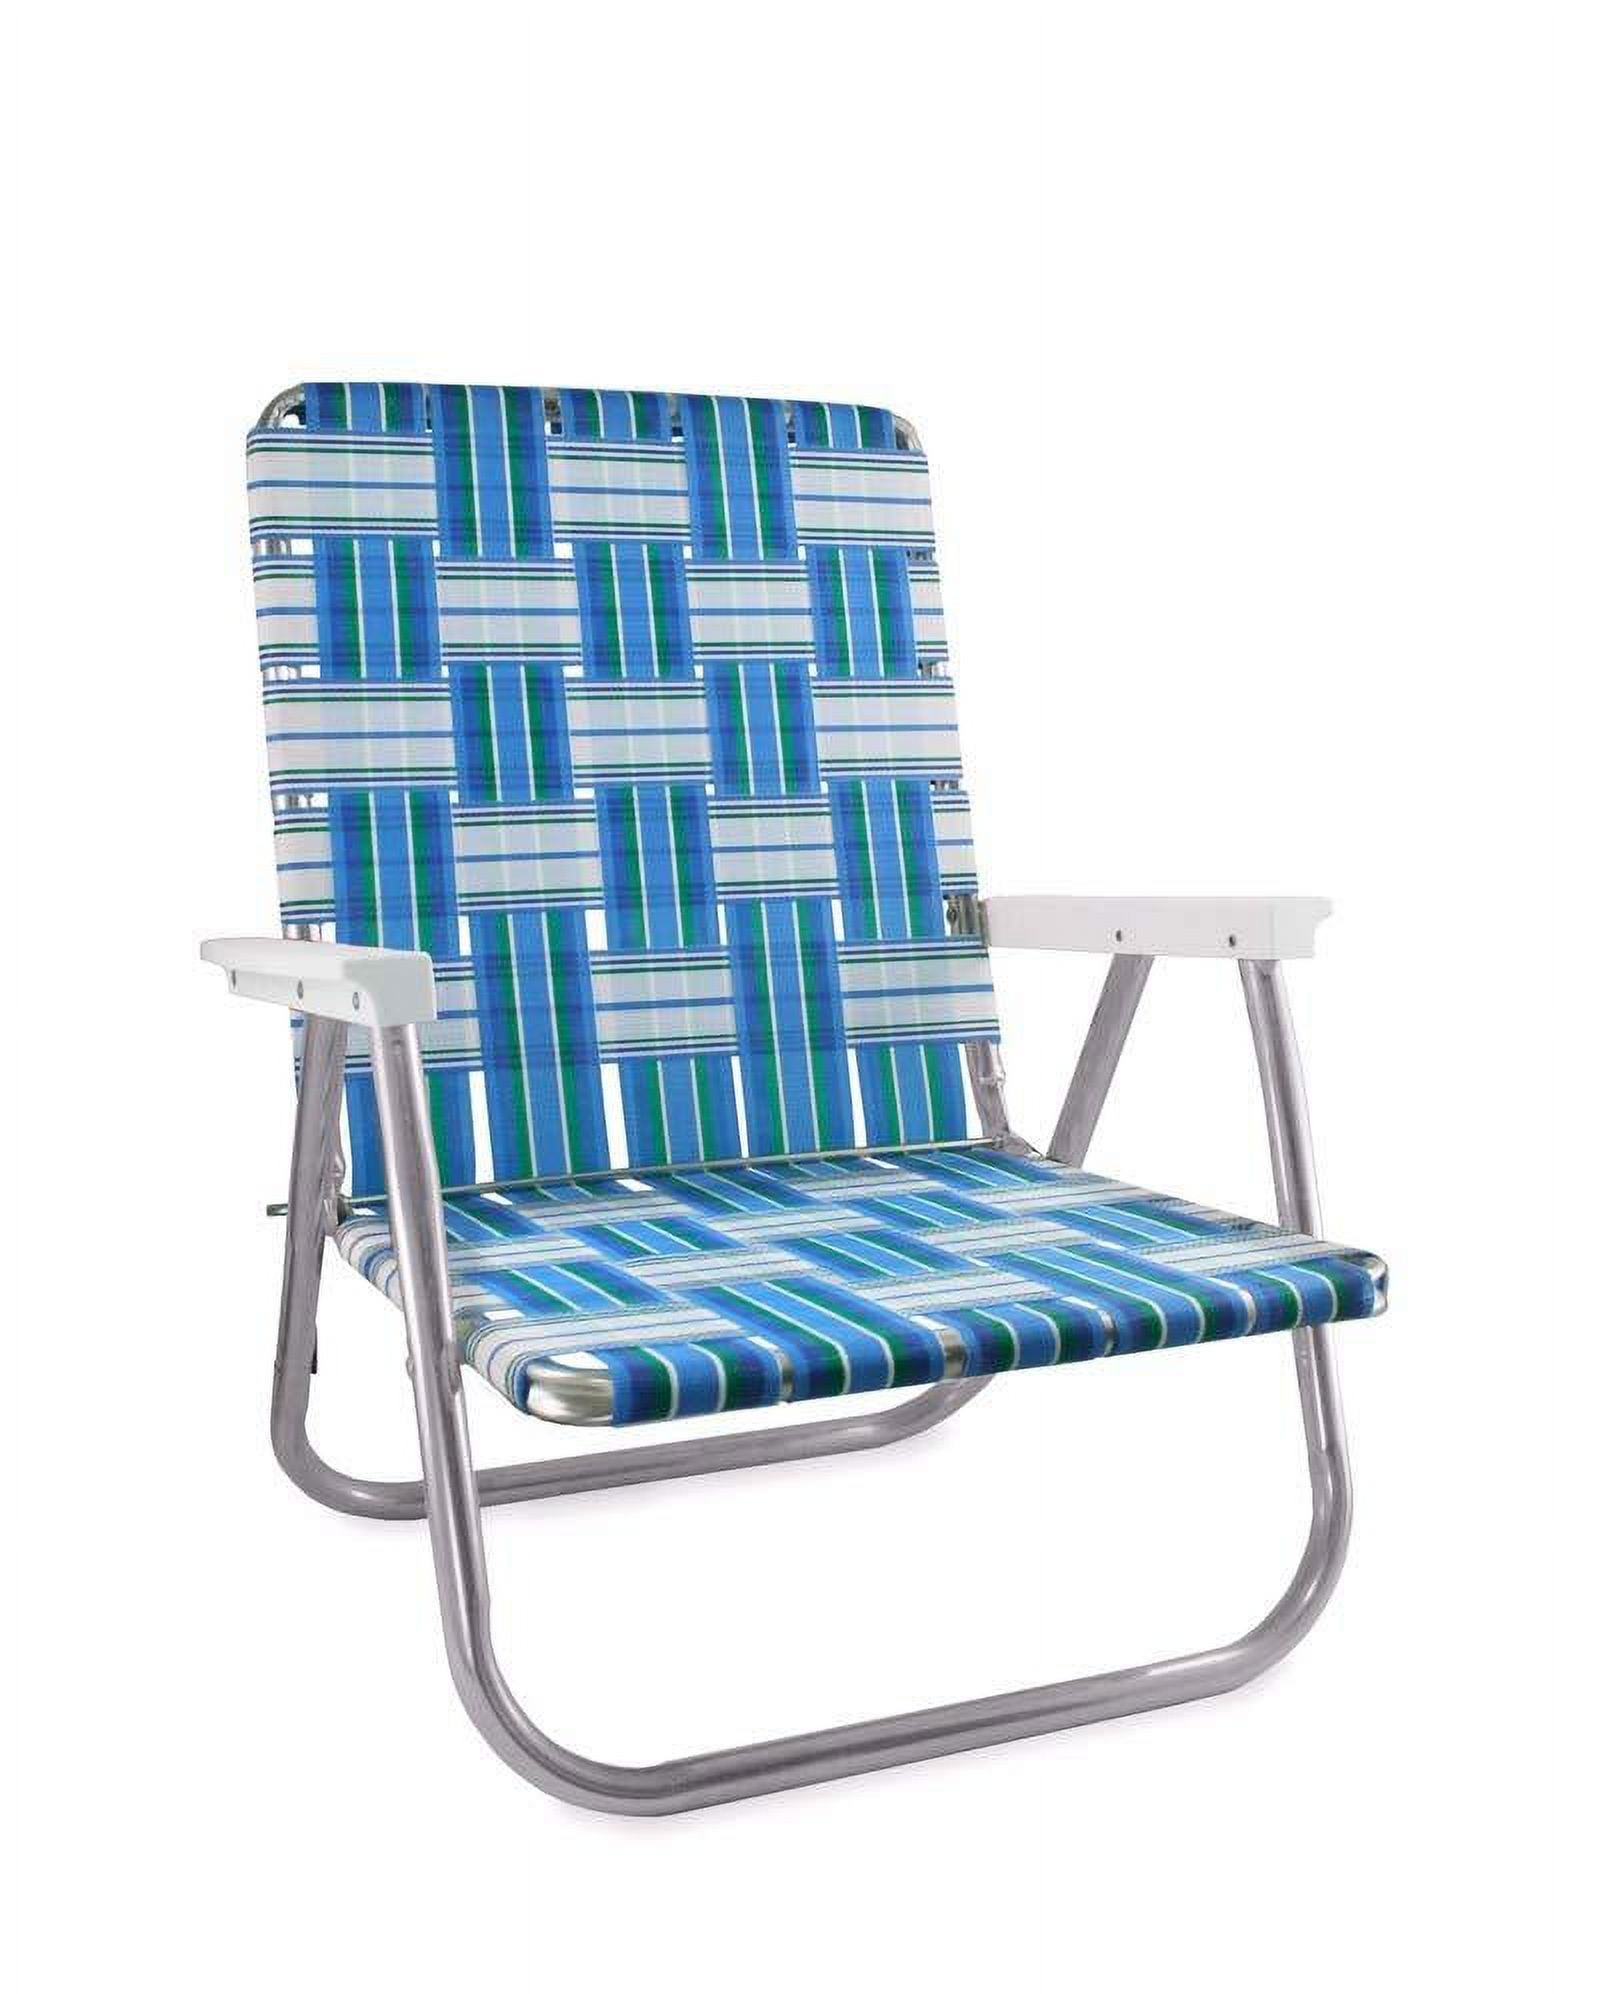 Lawn Chair USA Aluminum Folding Chair (1 Pack), Sea Island - image 1 of 6